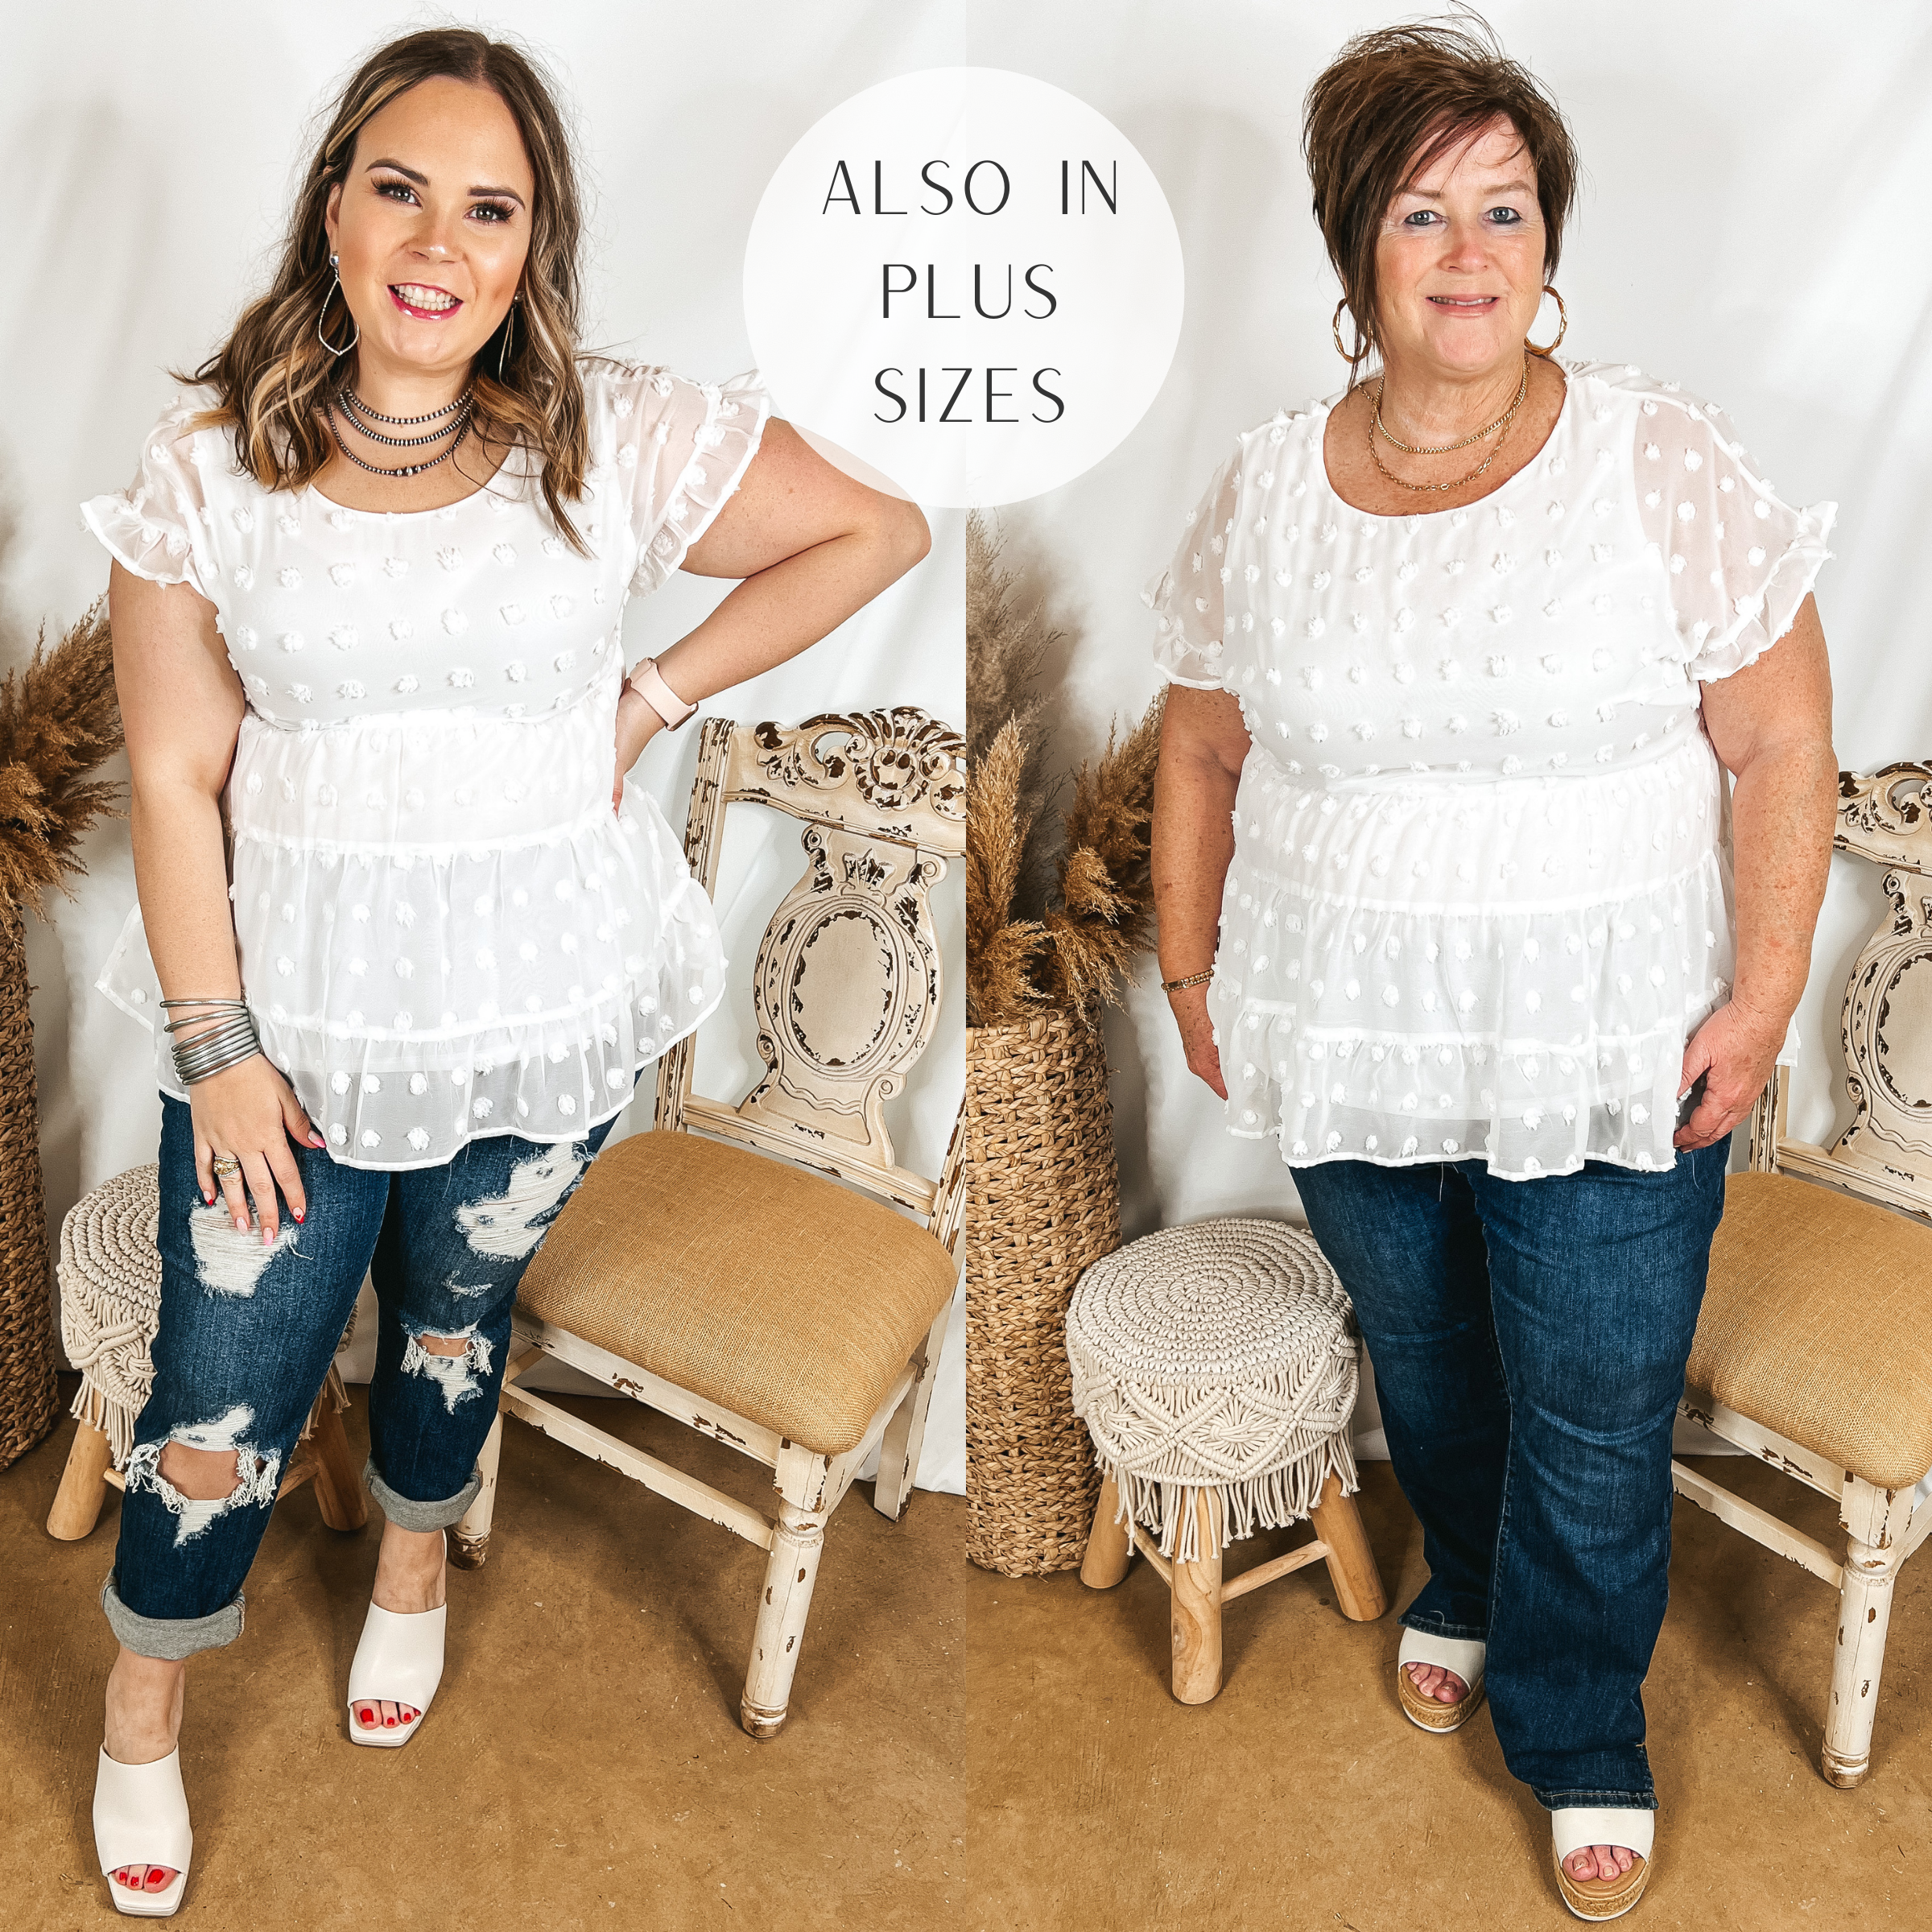 Models are wearing a white swiss dot blouse. Size large model has it paired with white heels and dark wash boyfriend jeans. Plus size model has it paired with bootcut jeans and white sandals.